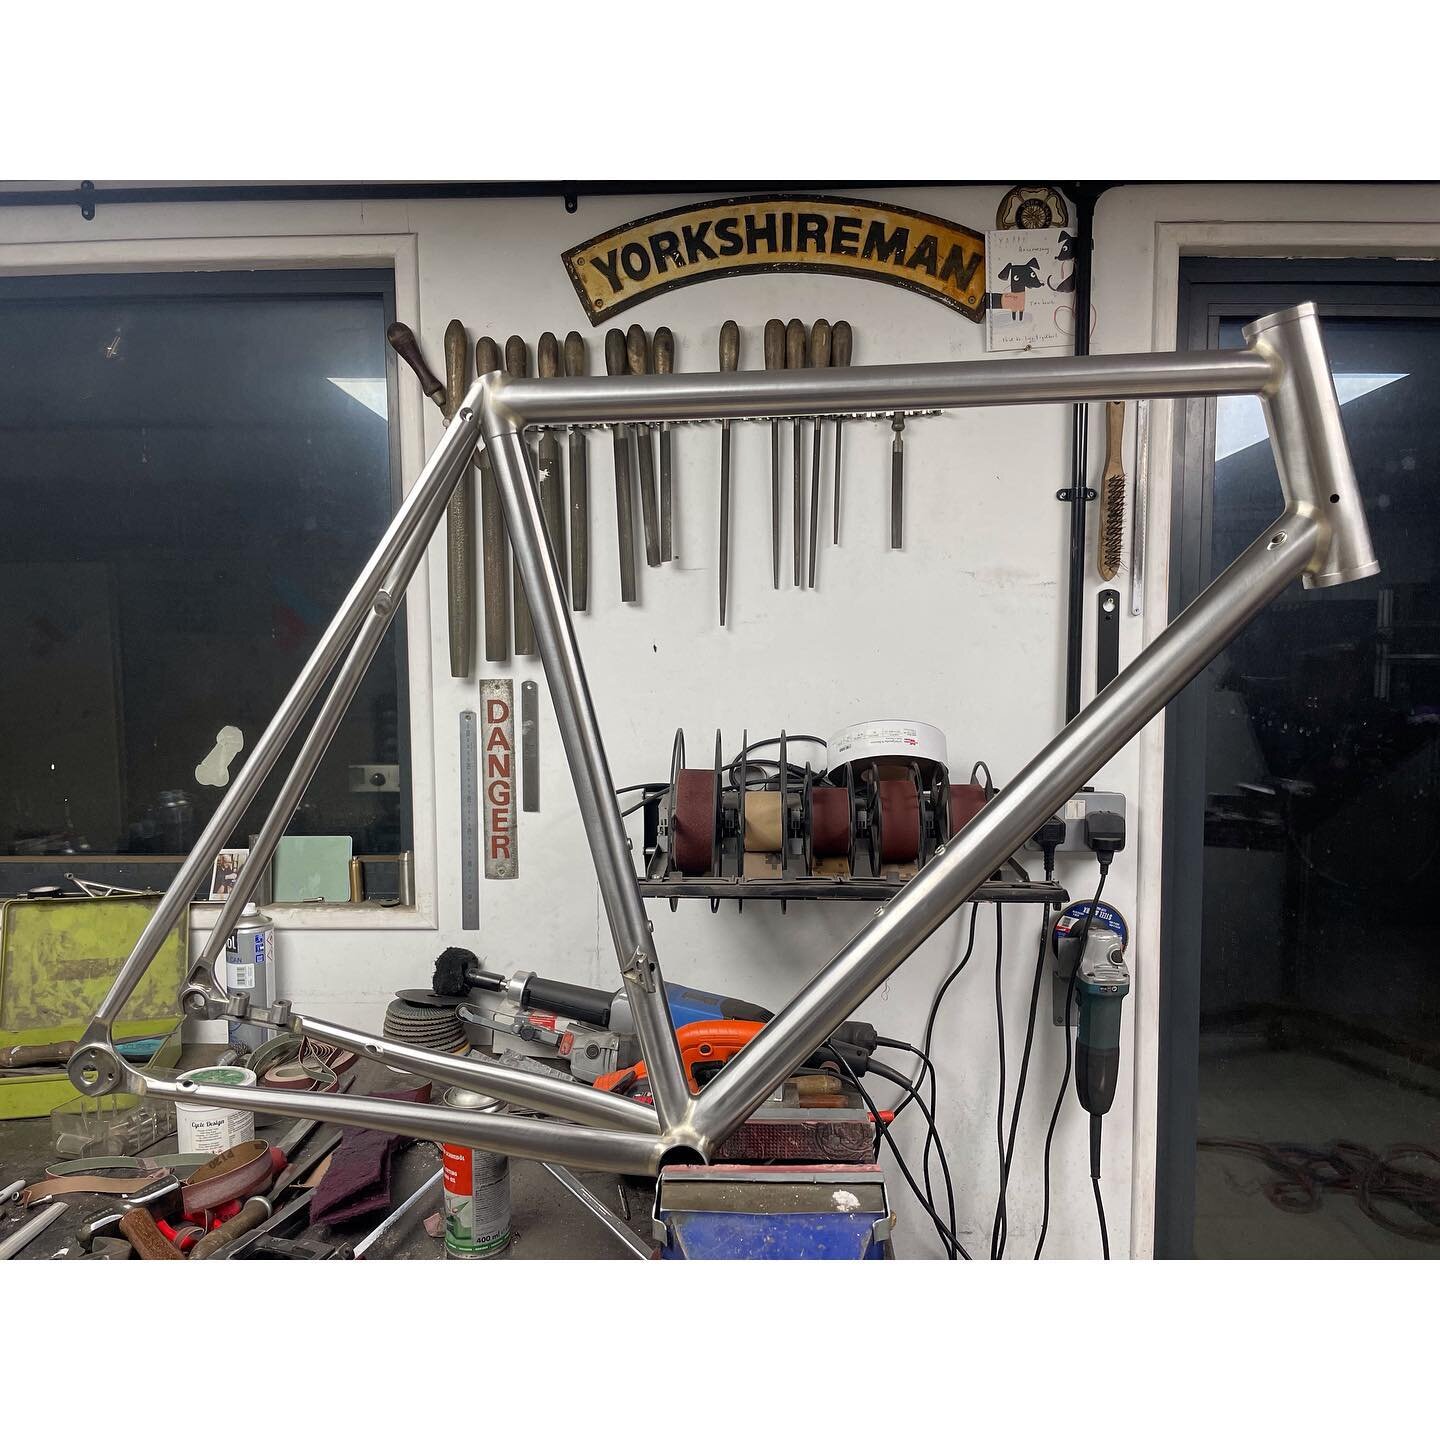 Tonight&rsquo;s completion is this lovely @columbus_official XCr frame for Dan. The whole rear triangle is to be polished on this one and contrary to popular belief, tartan paint is a thing.